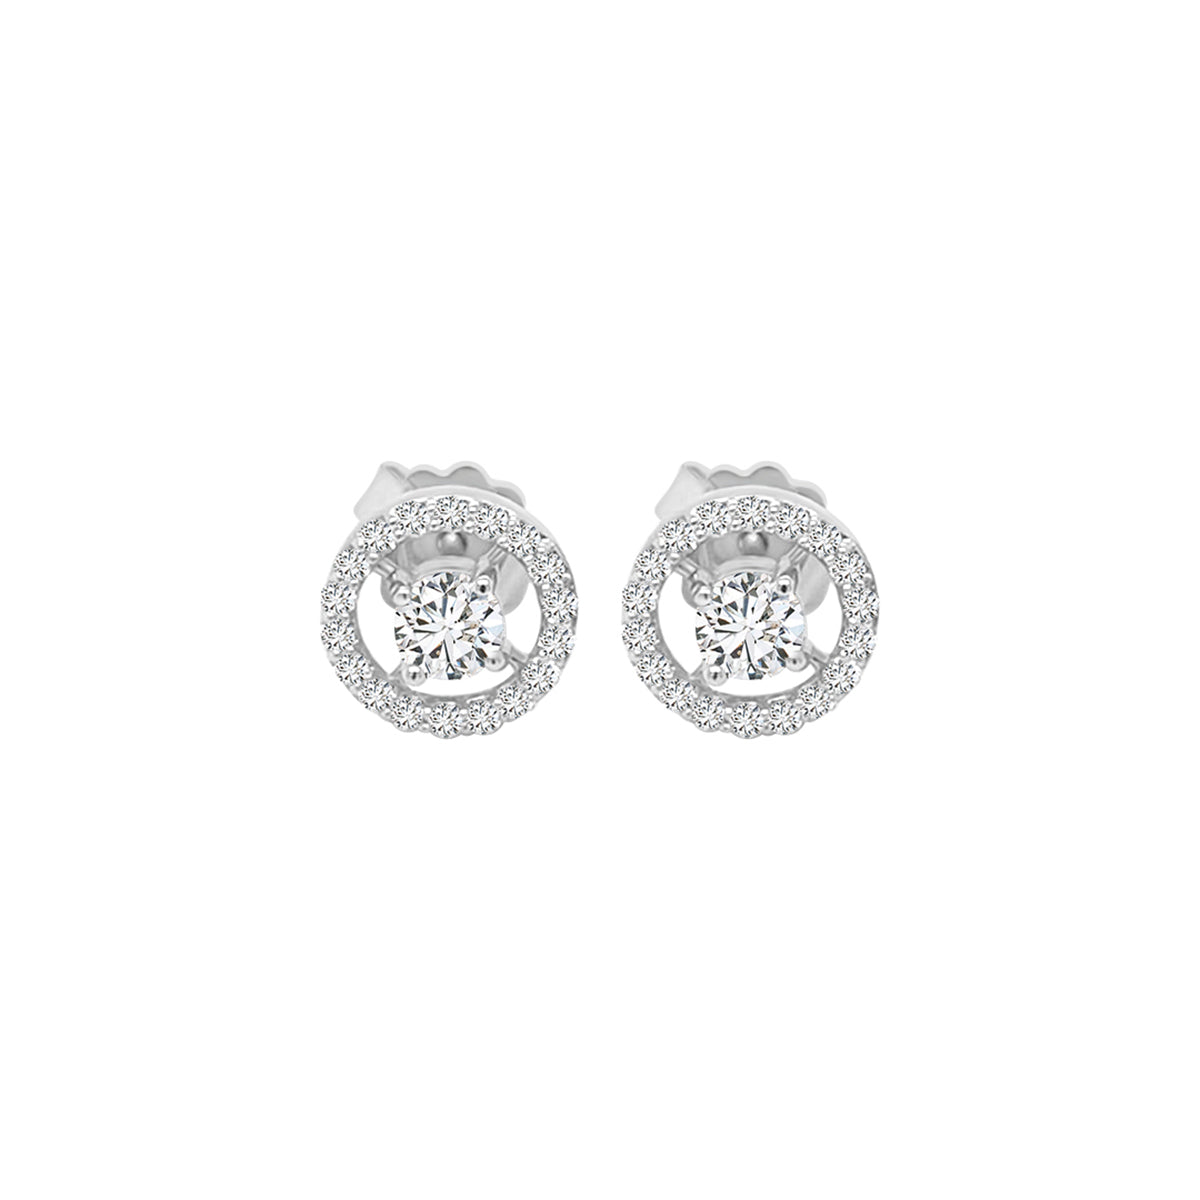 Halo Diamond Stud Earring Crafted In 18K White Gold